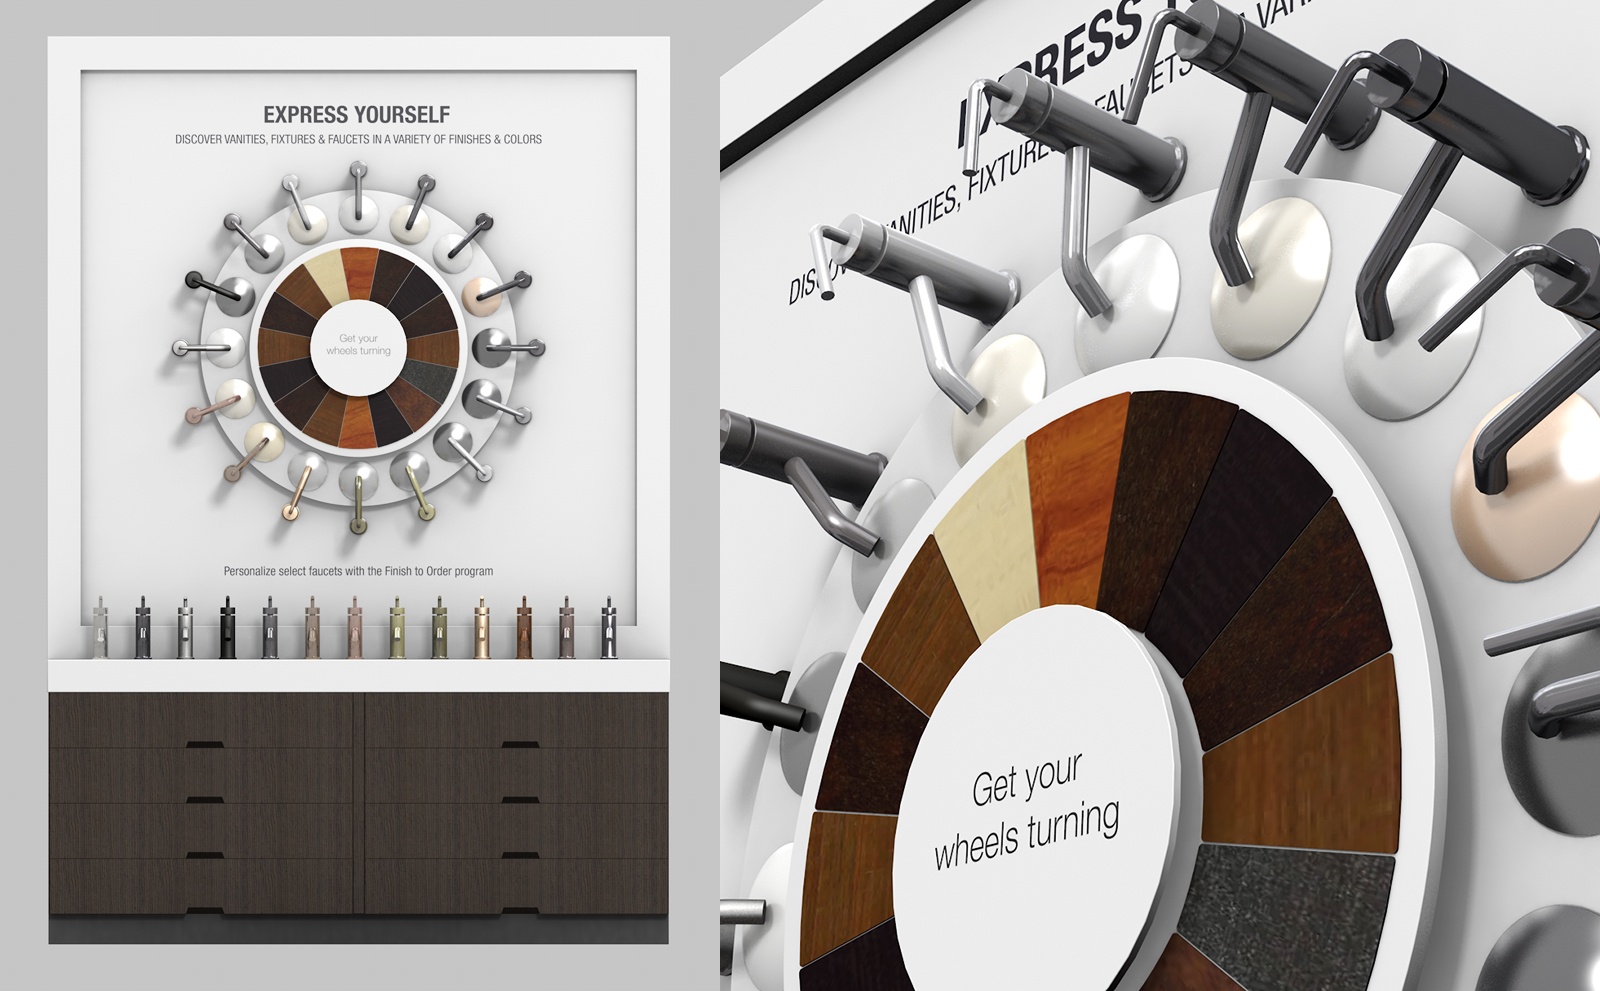 A split view showing both the full product and up-close view of Kohler's interactive finishes display, designed and built by The Bernard Group.